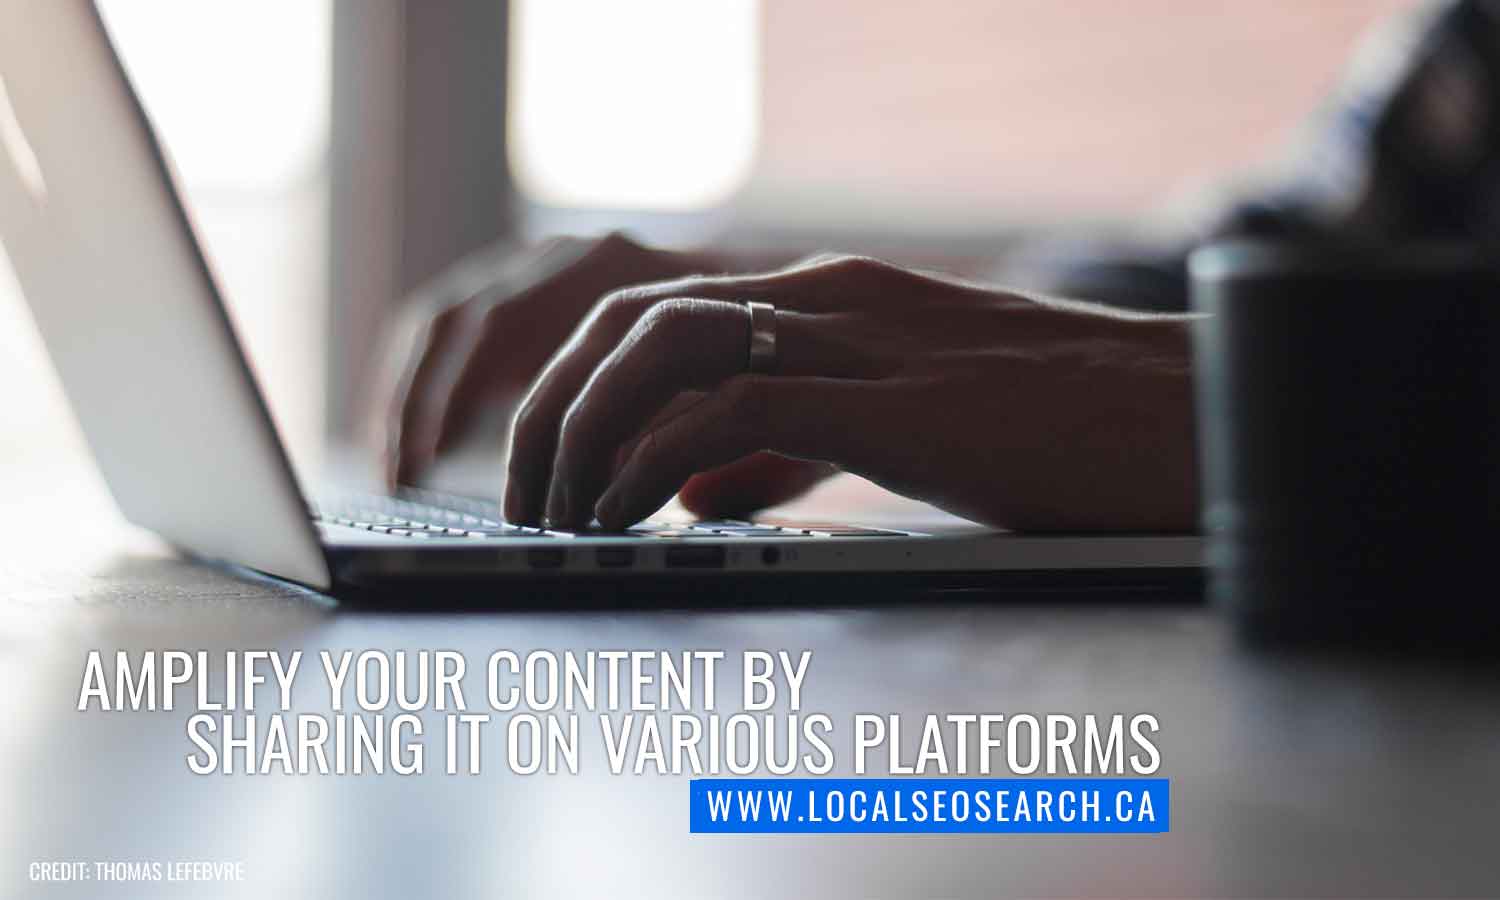 Amplify your content by sharing it on various platforms